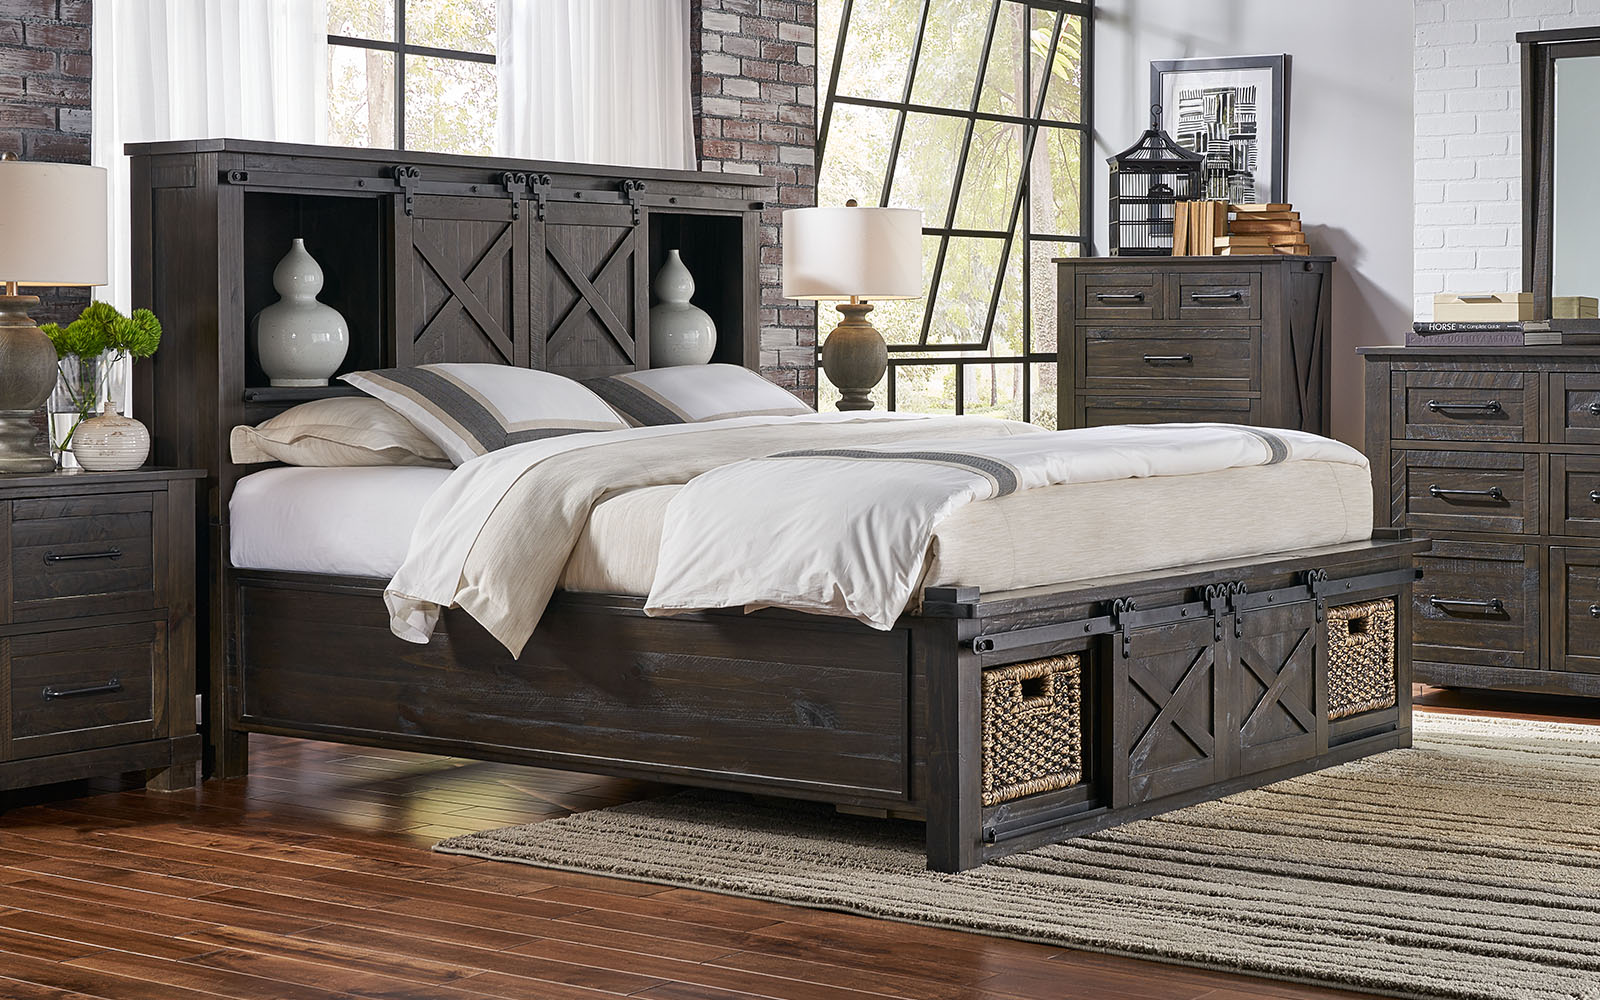 King Bed Storage Headboard W, King Bed Frame And Headboard With Storage